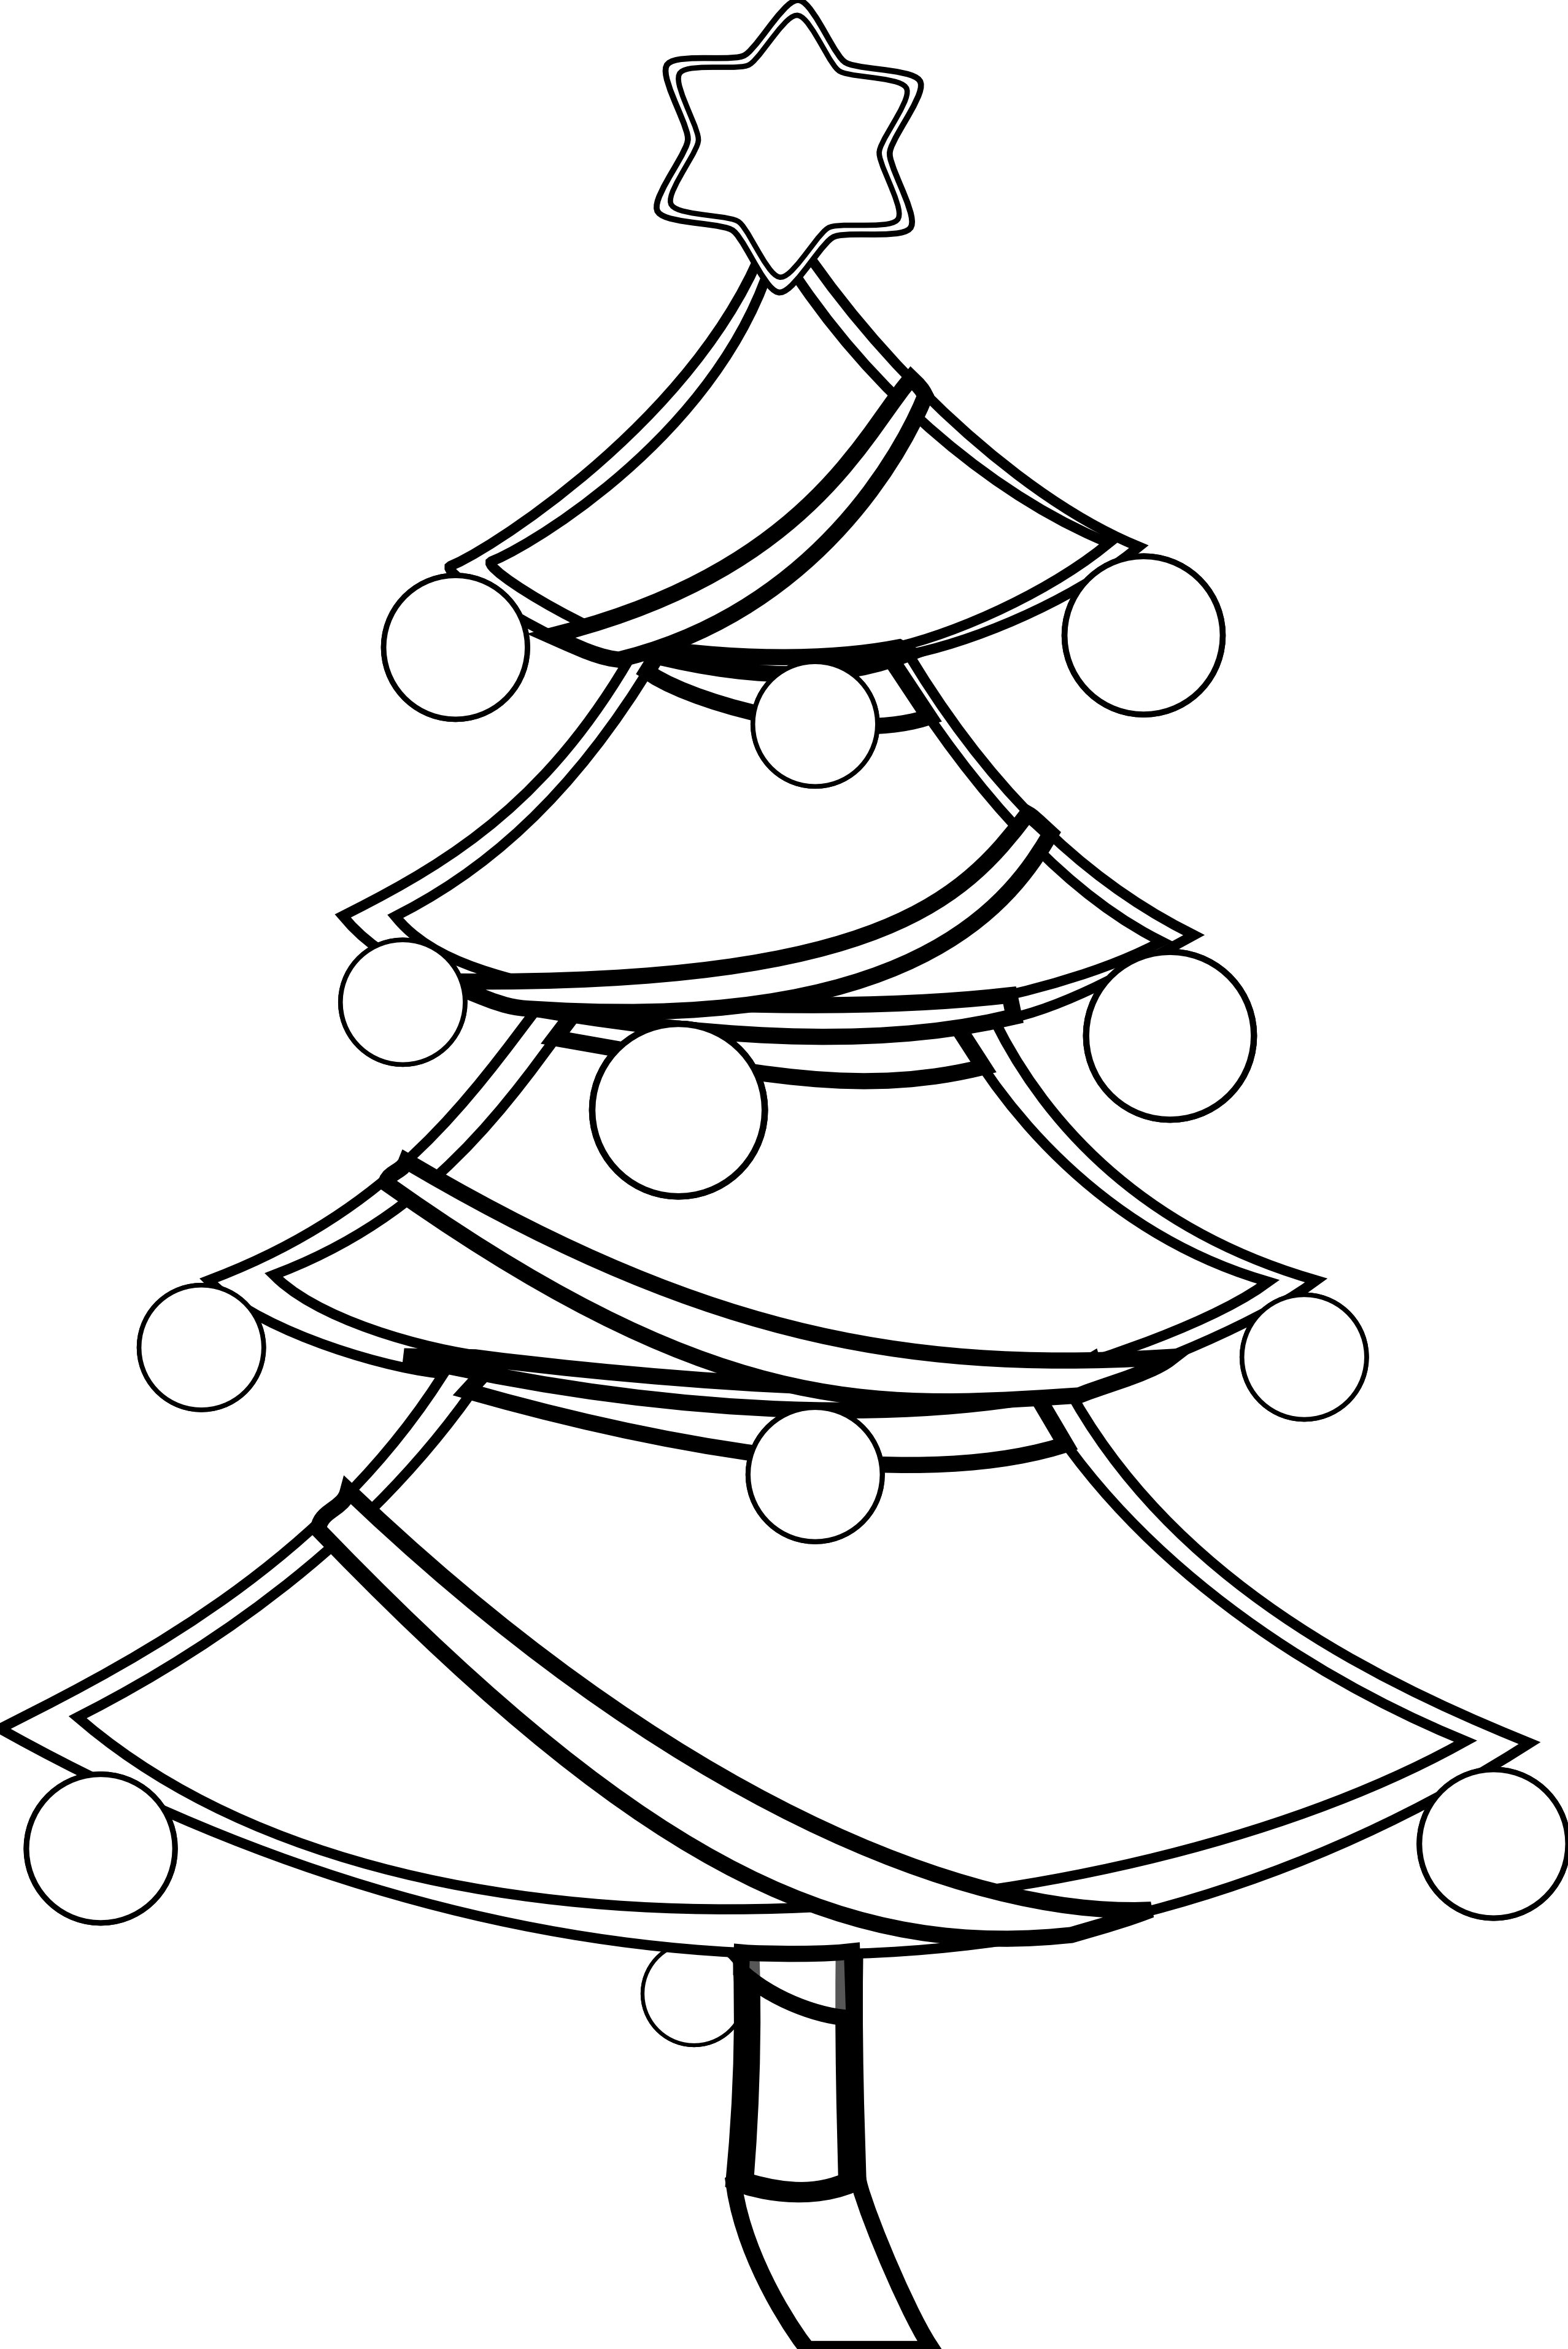 Free Christmas Black And White Images, Download Free Clip